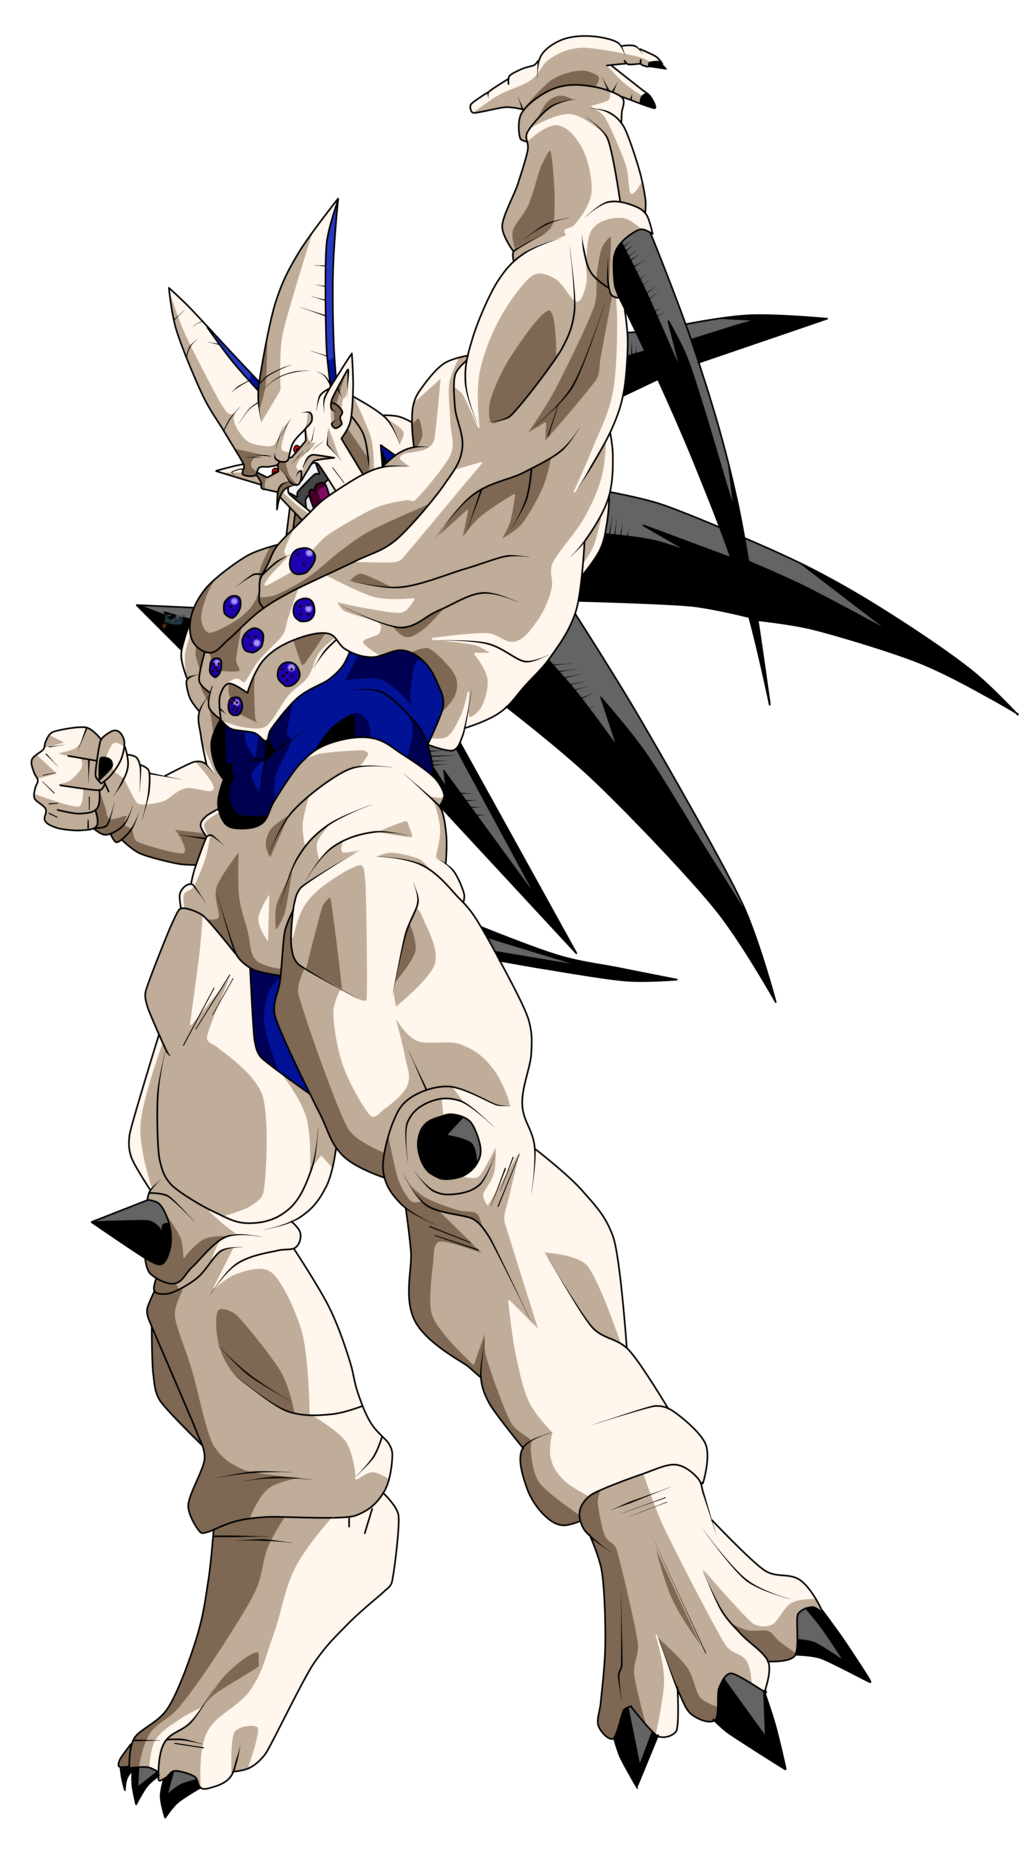 Image - Omega shenron by frost z-db161nt.png | Wiki Dragon Ball | FANDOM powered by Wikia